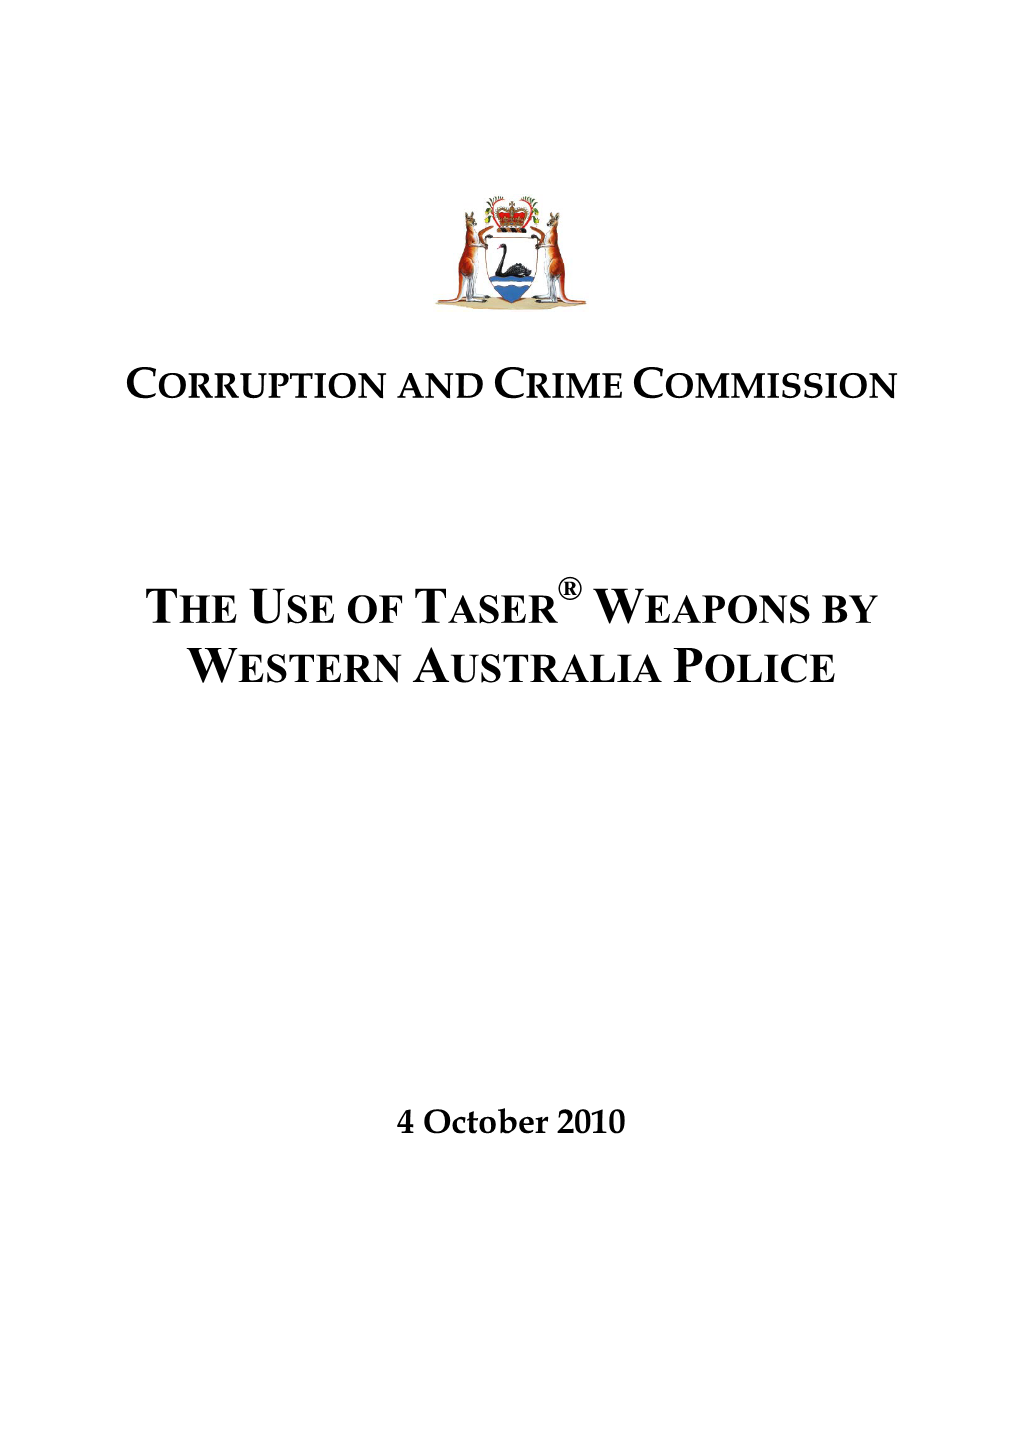 The Use of Taser Weapons by Western Australia Police